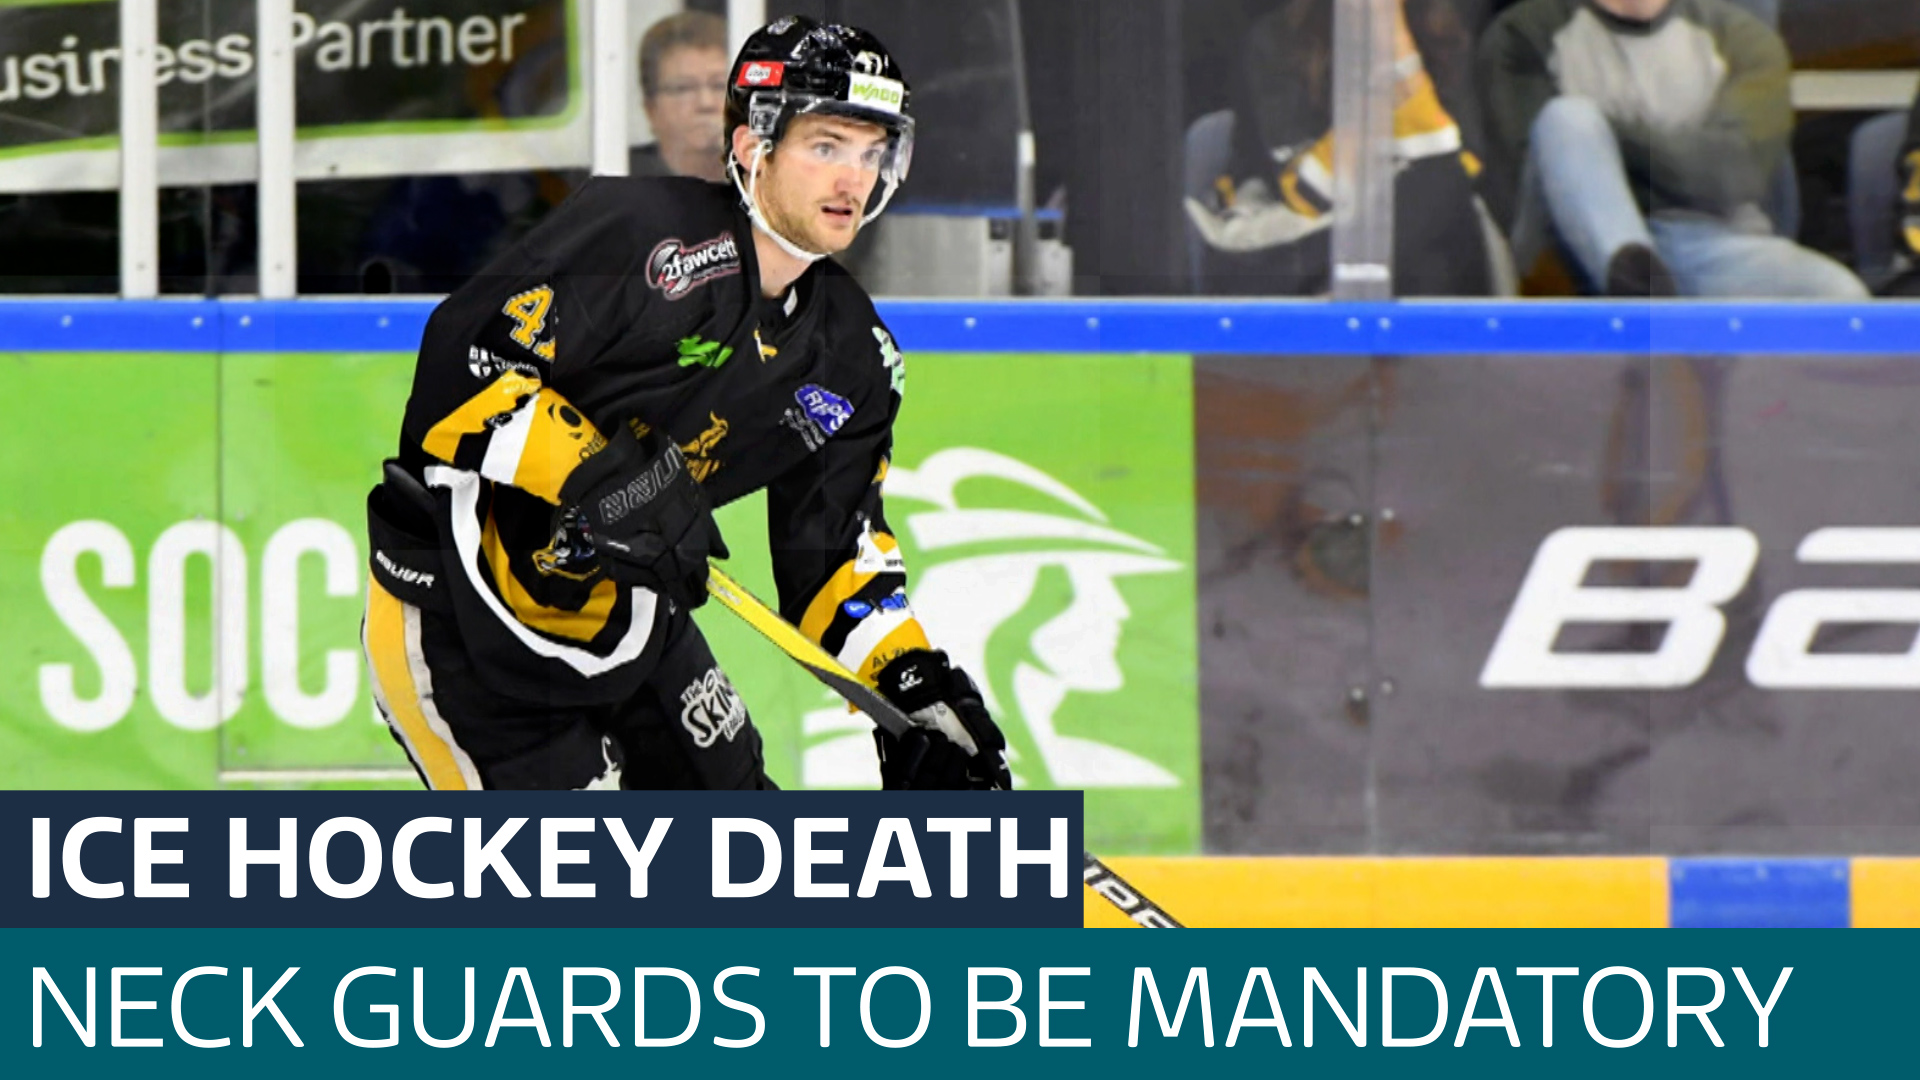 English ice hockey makes neck guards mandatory after death of US player